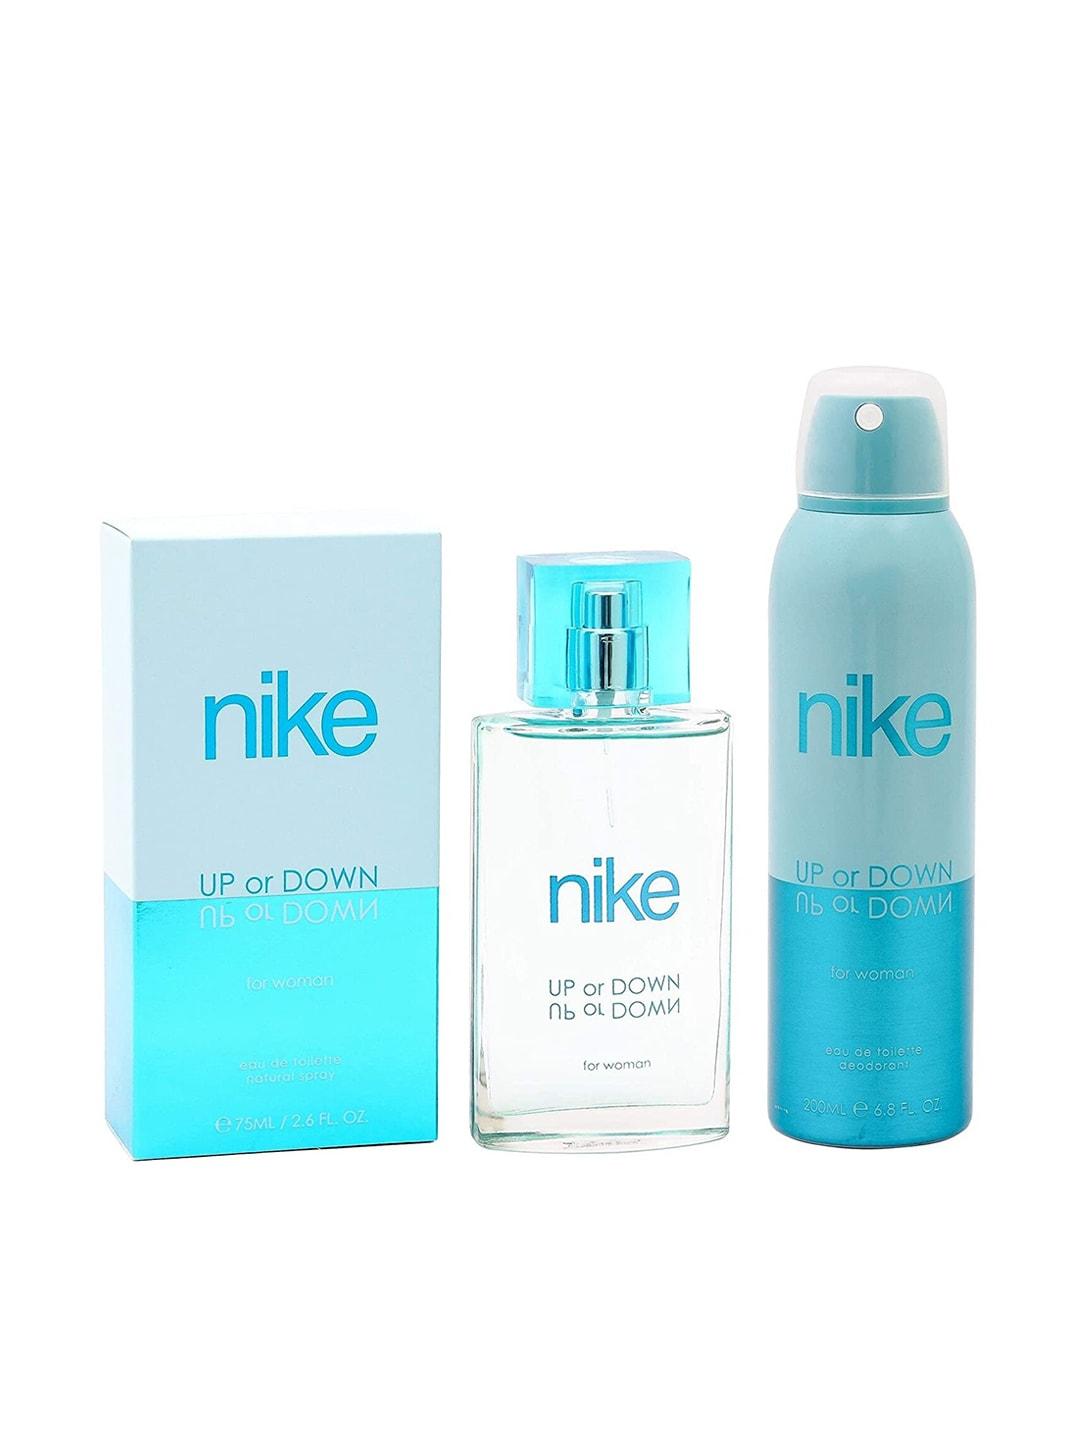 nike-woman-combo-set-of-up-or-down-edt-perfume-(75ml)-+--deodorant-(200ml)